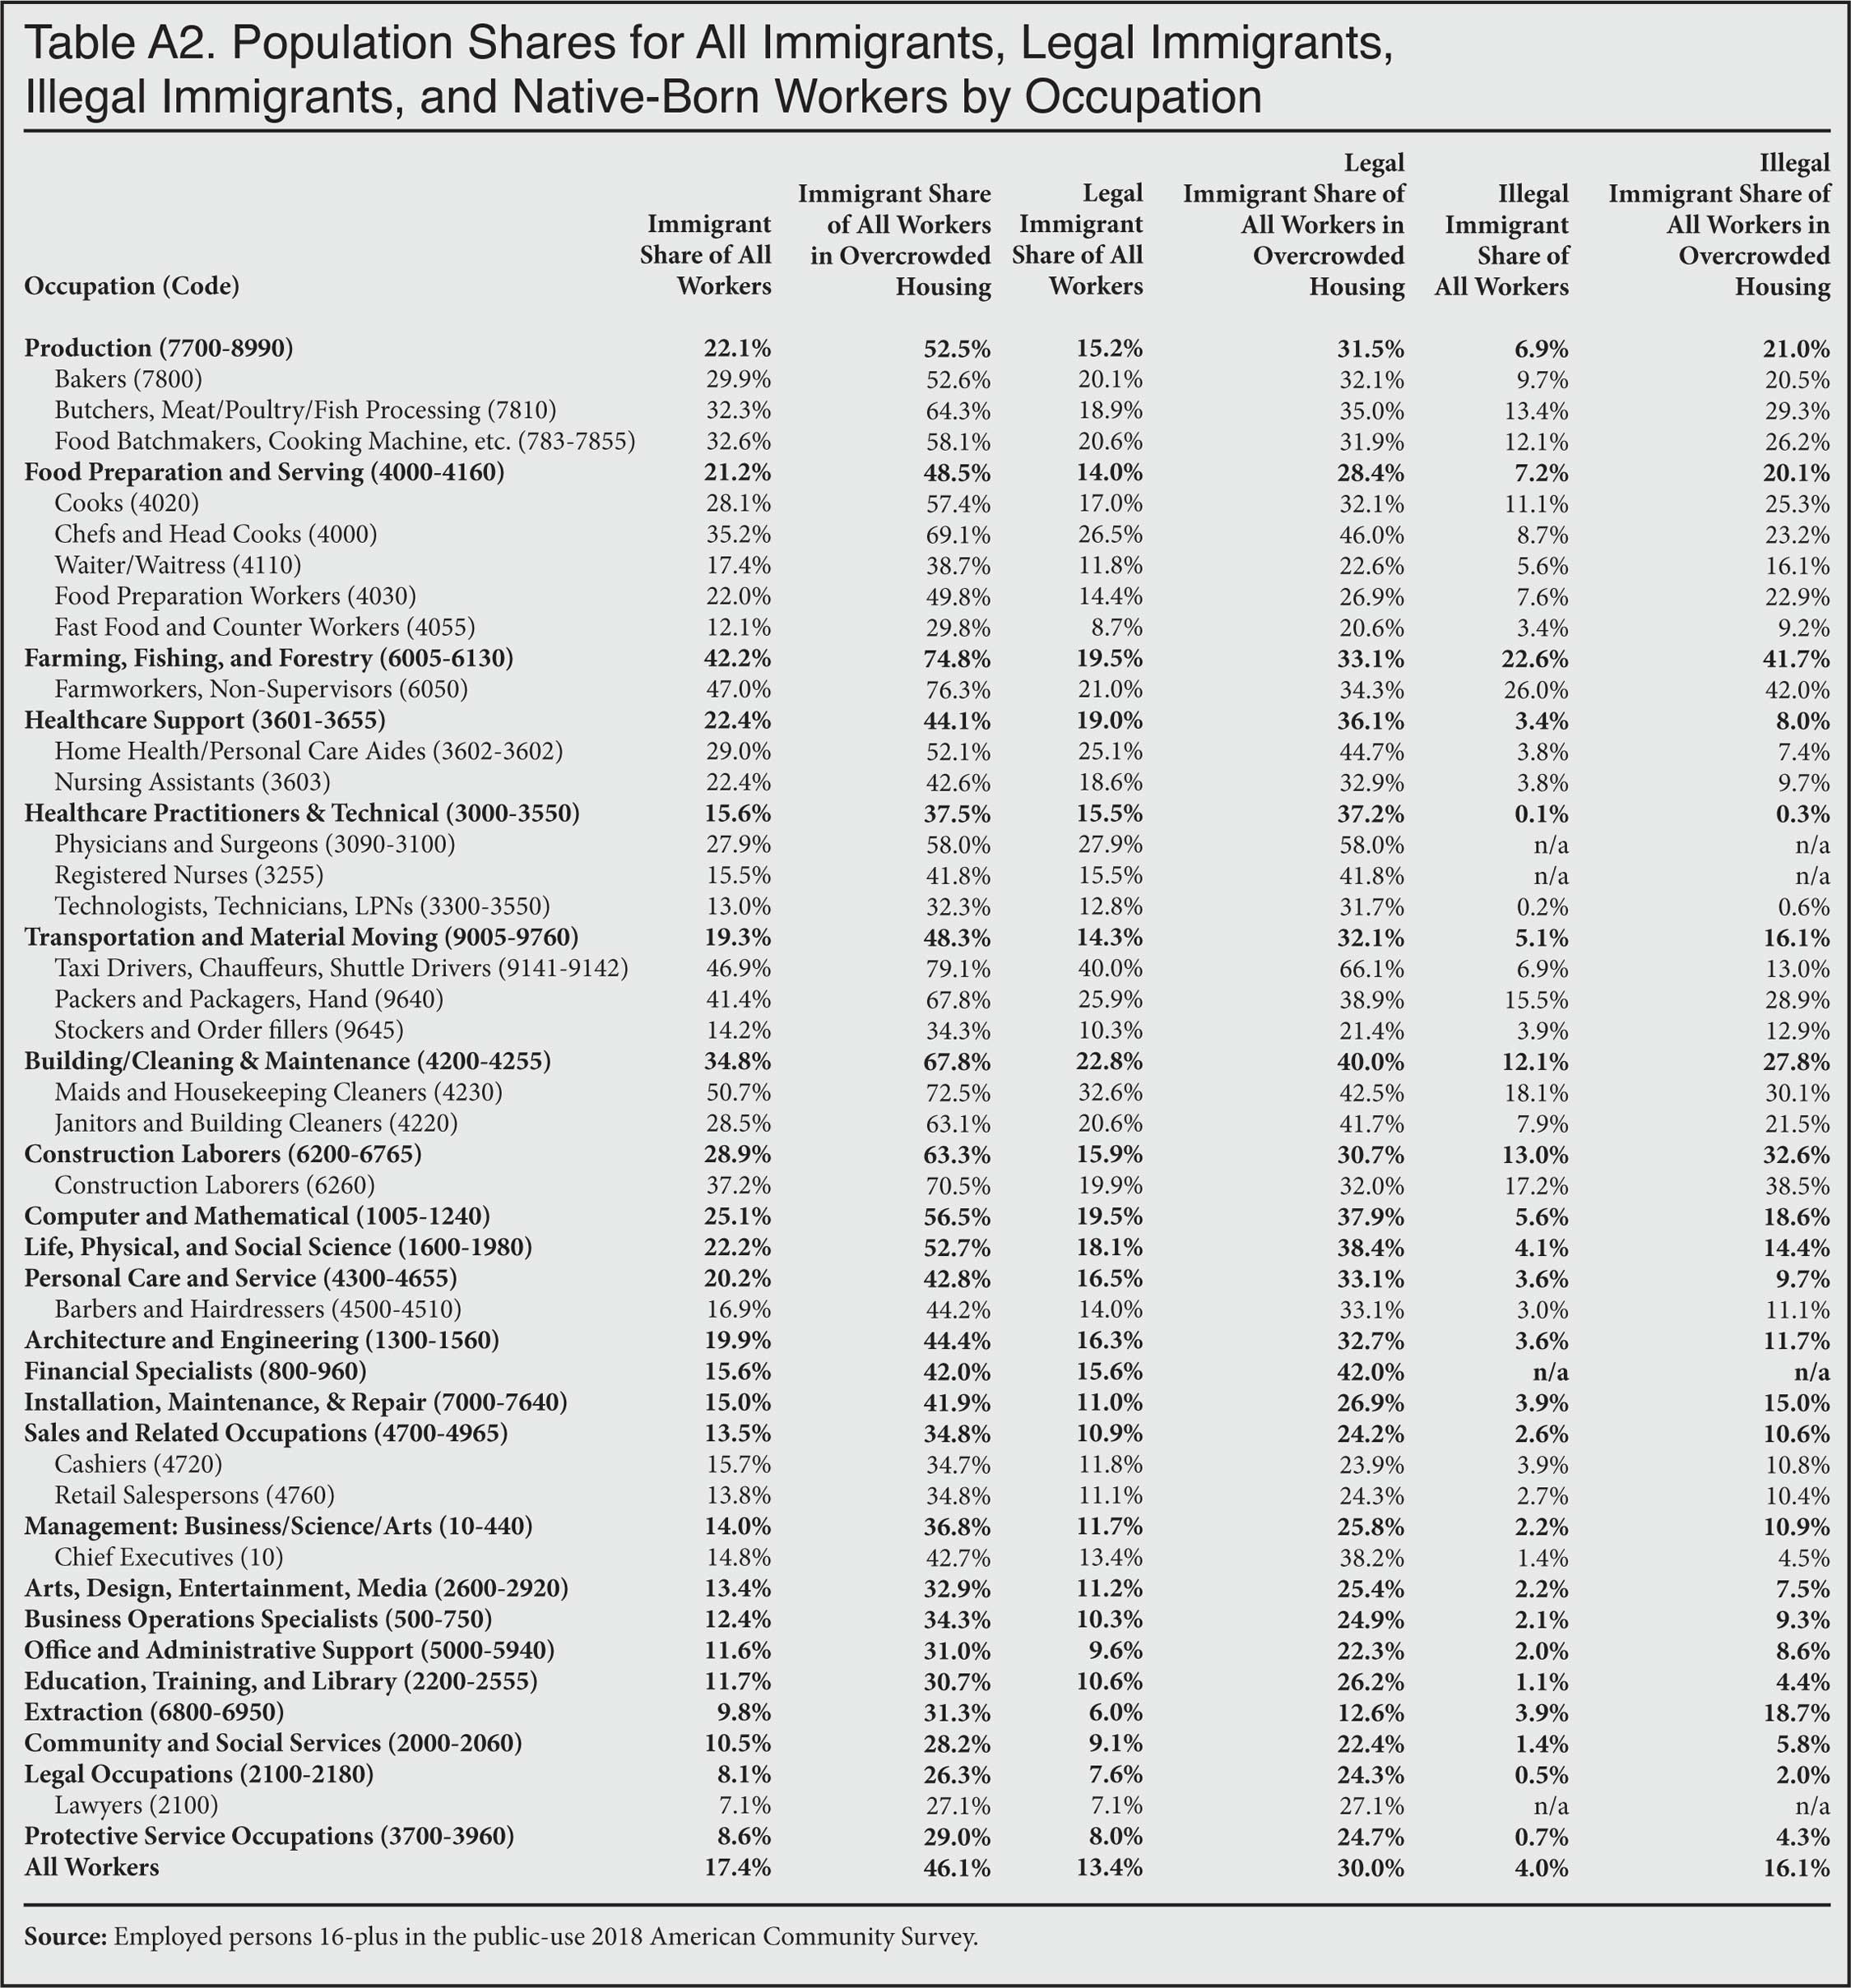 Table: Population shares for all immigrants, legal immigrants, and native born workers by occupation